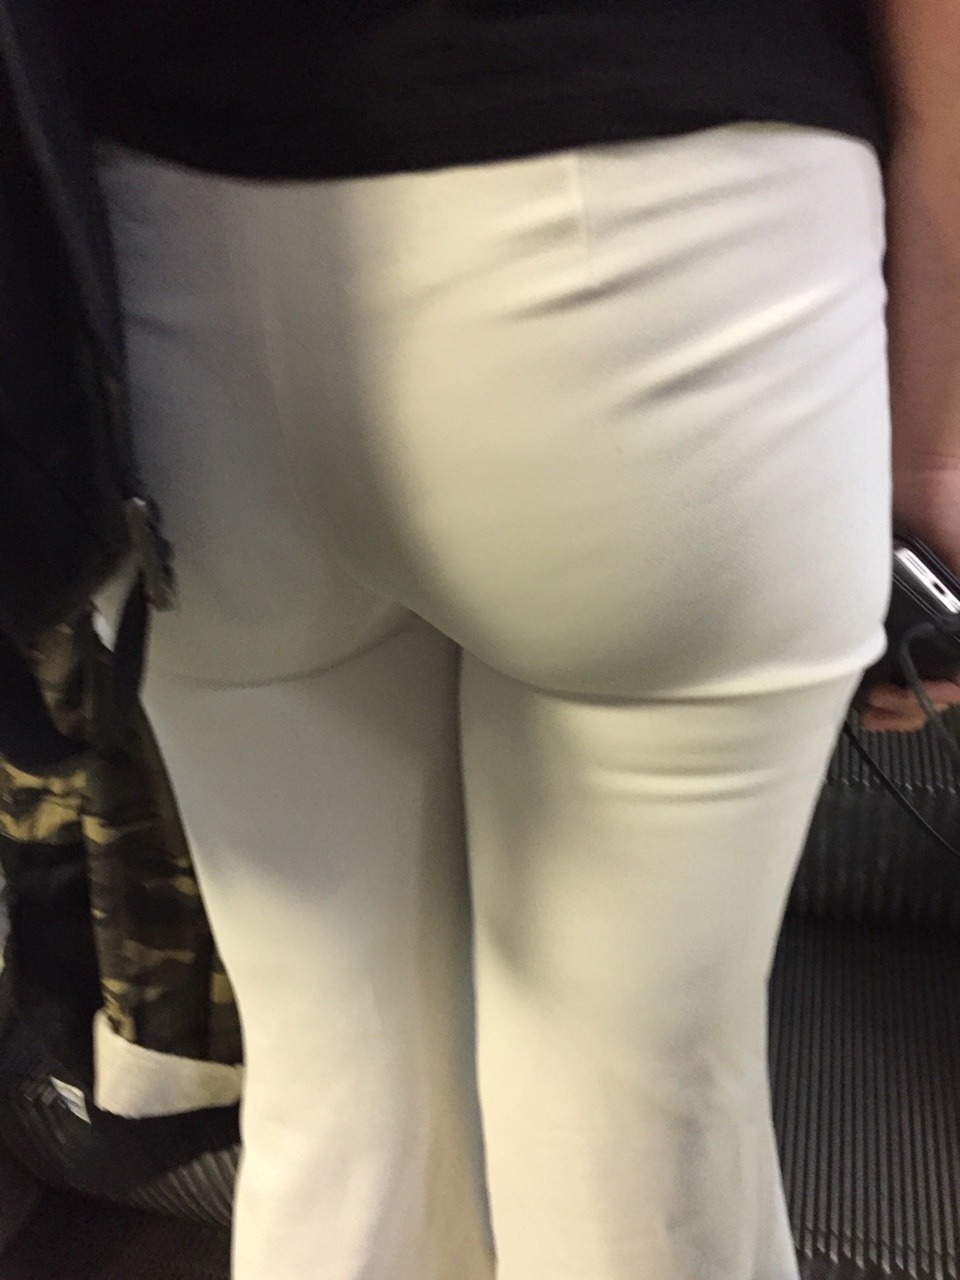 Tight white pants with lace panties underneath